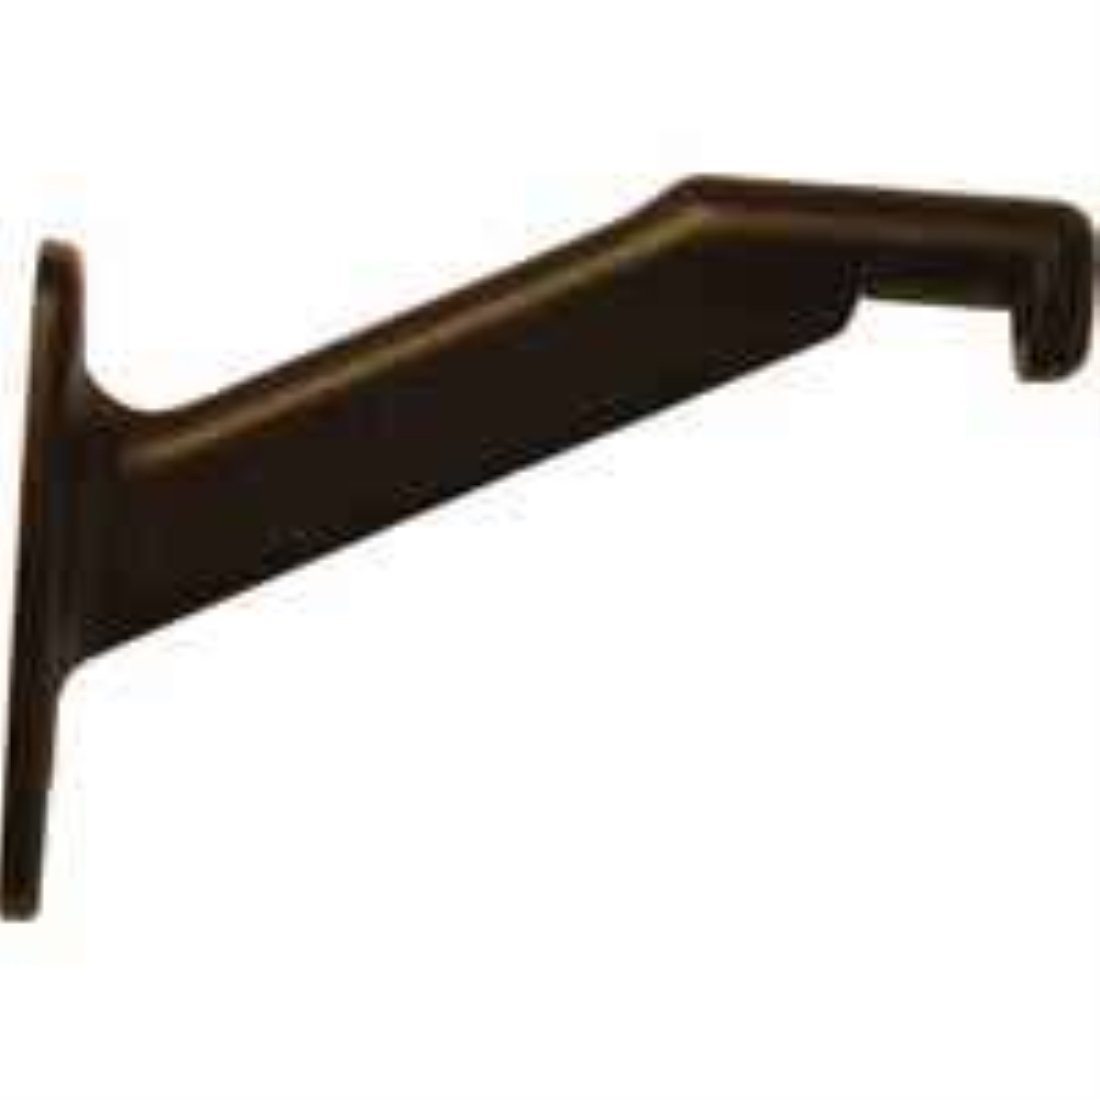 buy hand rail brackets & home finish hardware at cheap rate in bulk. wholesale & retail builders hardware items store. home décor ideas, maintenance, repair replacement parts